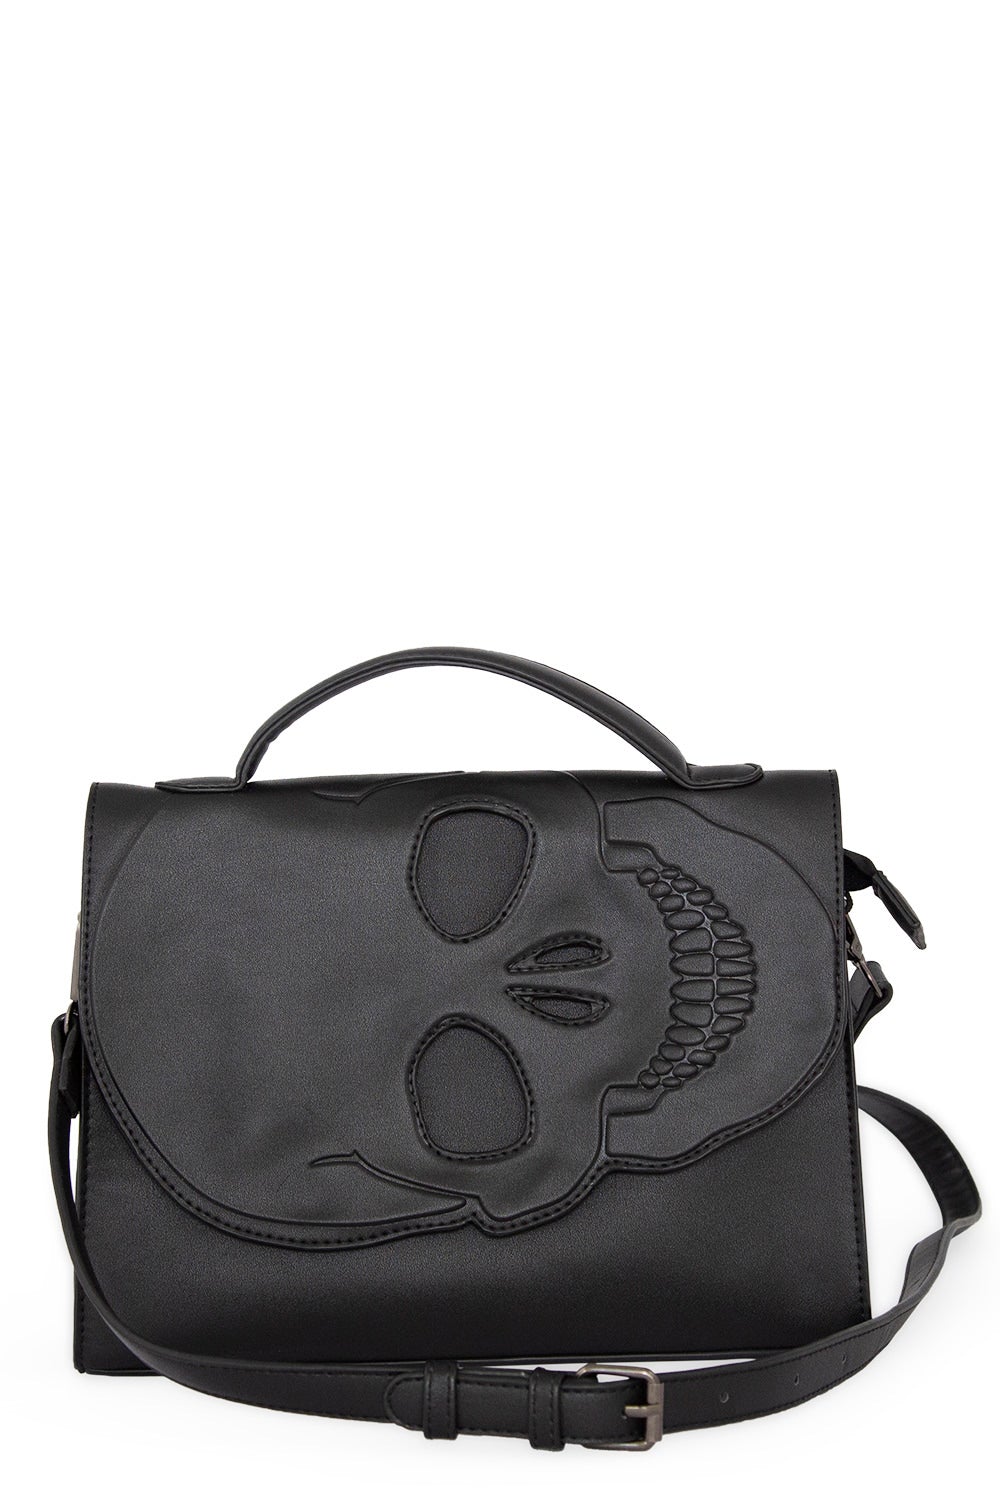 Black handbag with skull cut out flap with handle strap and long adjustable strap